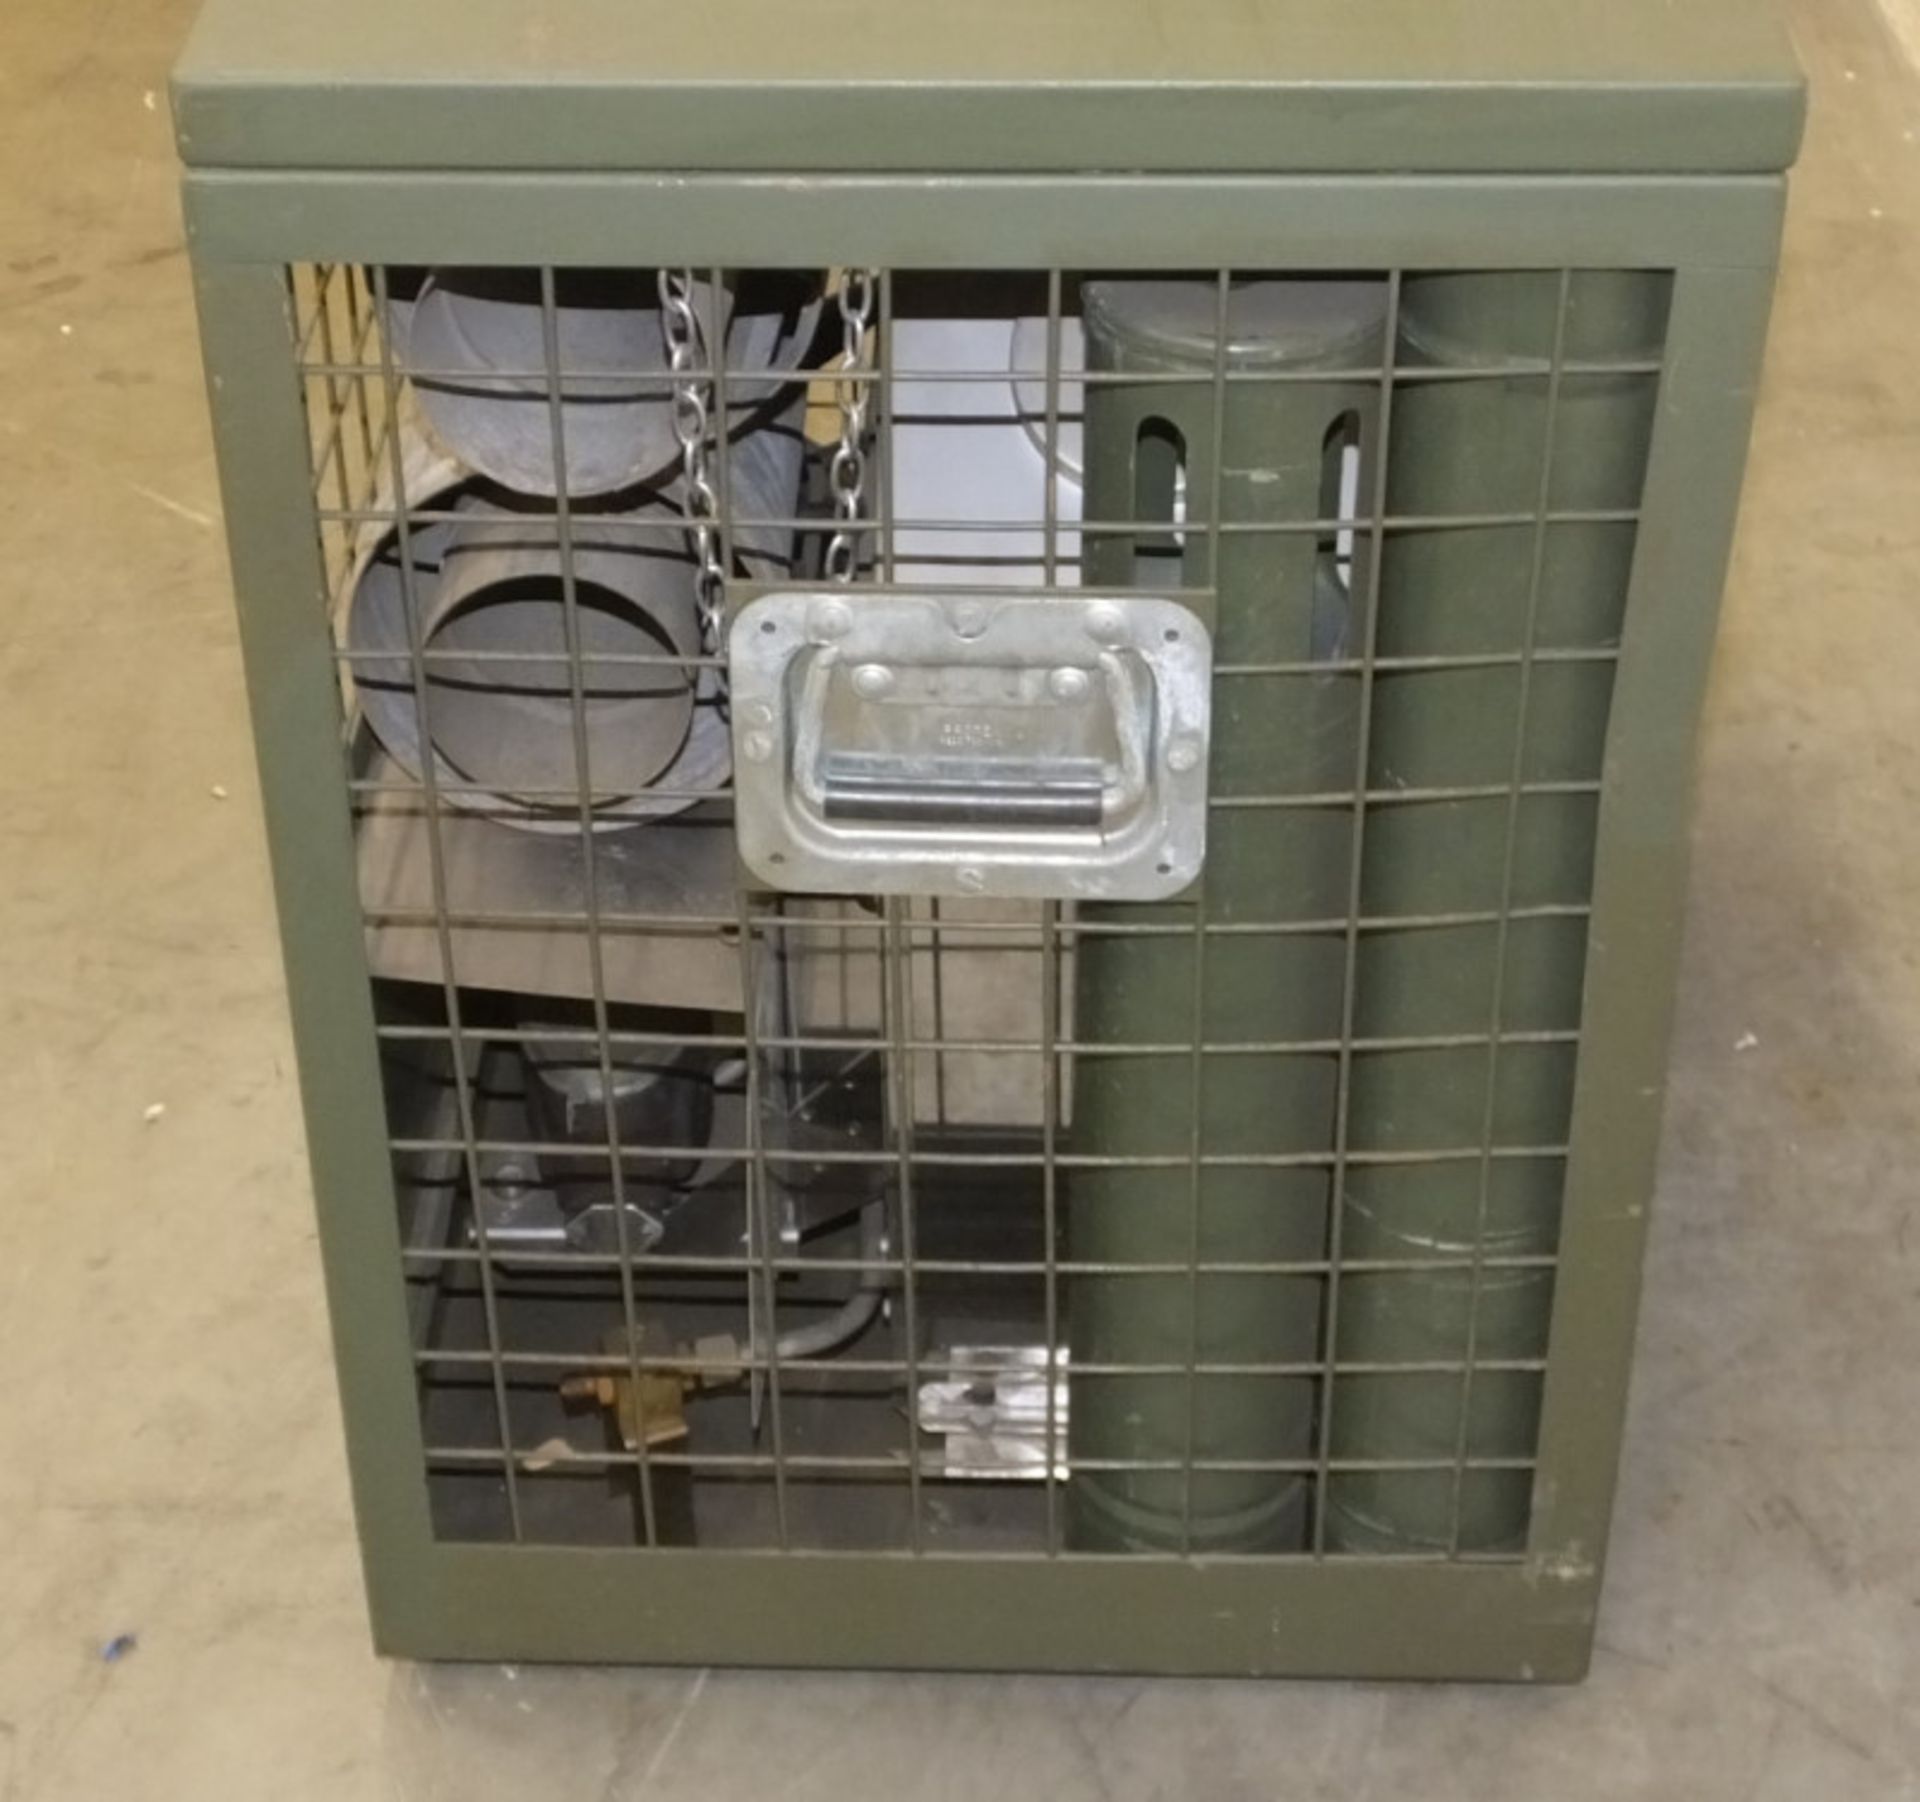 HotBox Heaters Tent Heater GHS III - NSN 4520-99-130-6045 Output - 5-15kW, Ex-MOD specific - Image 12 of 12